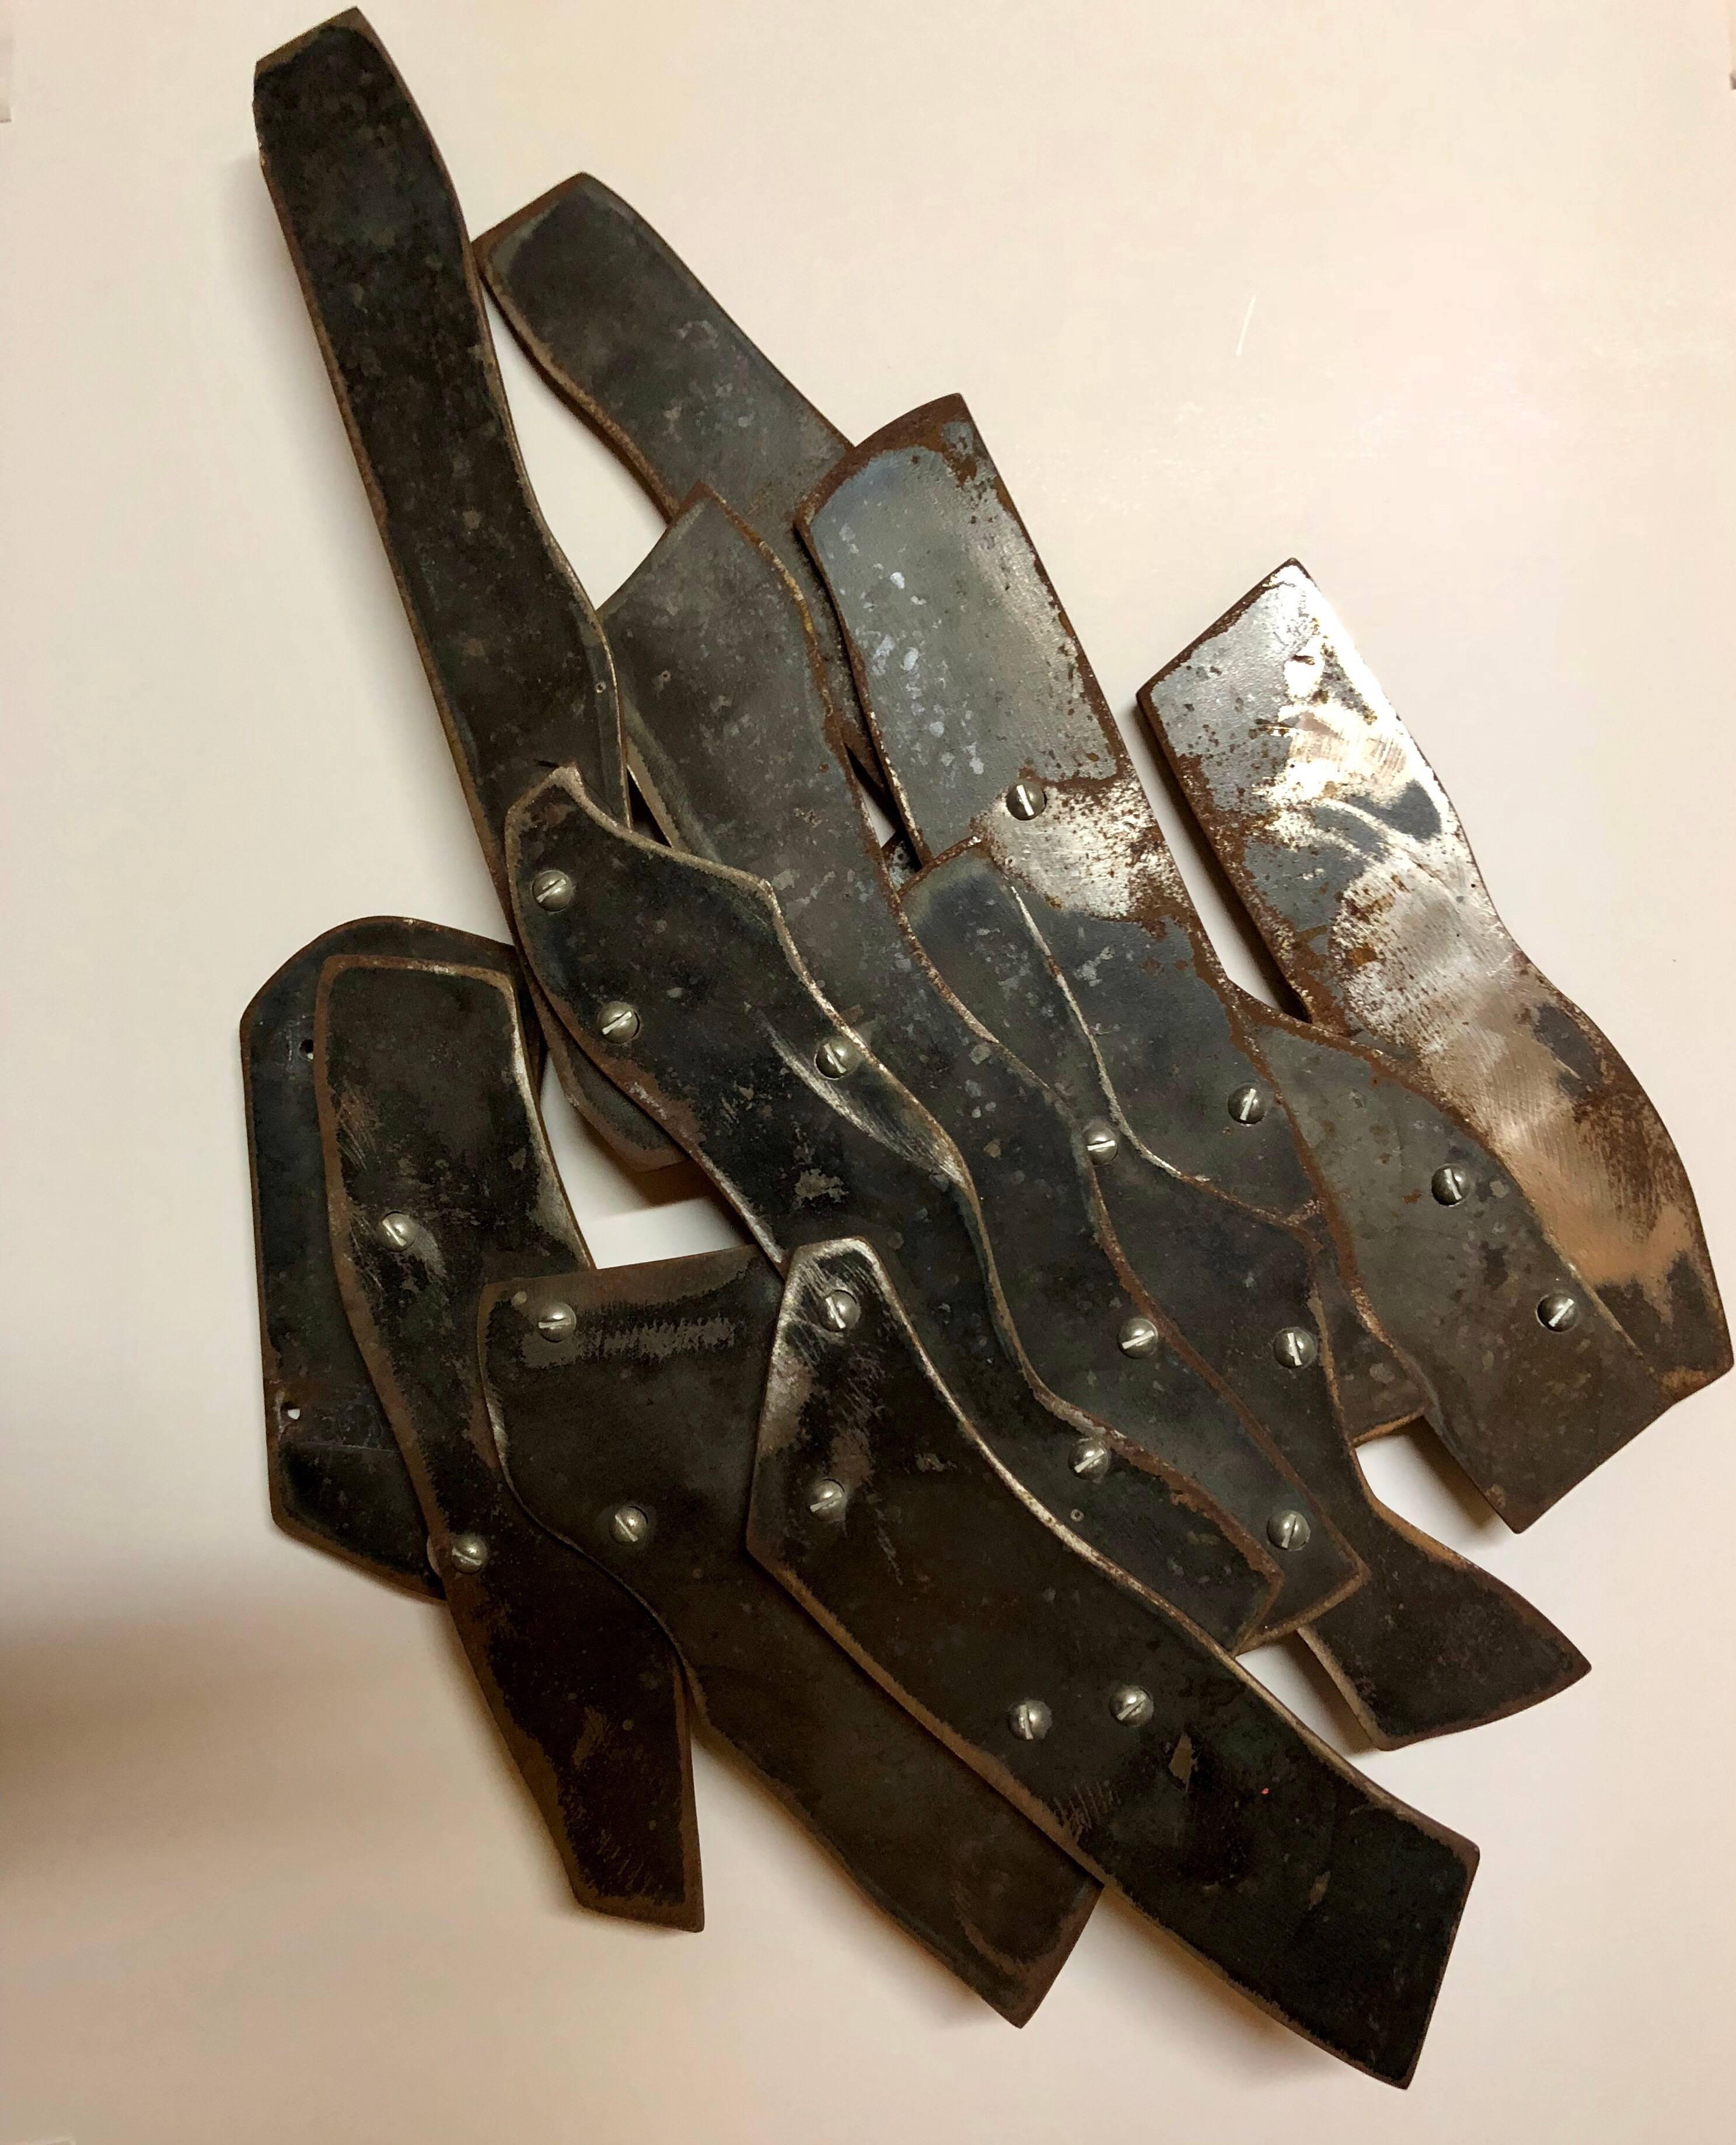 Robert Goodnough Abstract Sculpture - Abstract Expressionist Patinated Metal Assemblage Sculpture Steel, Nuts, Bolts